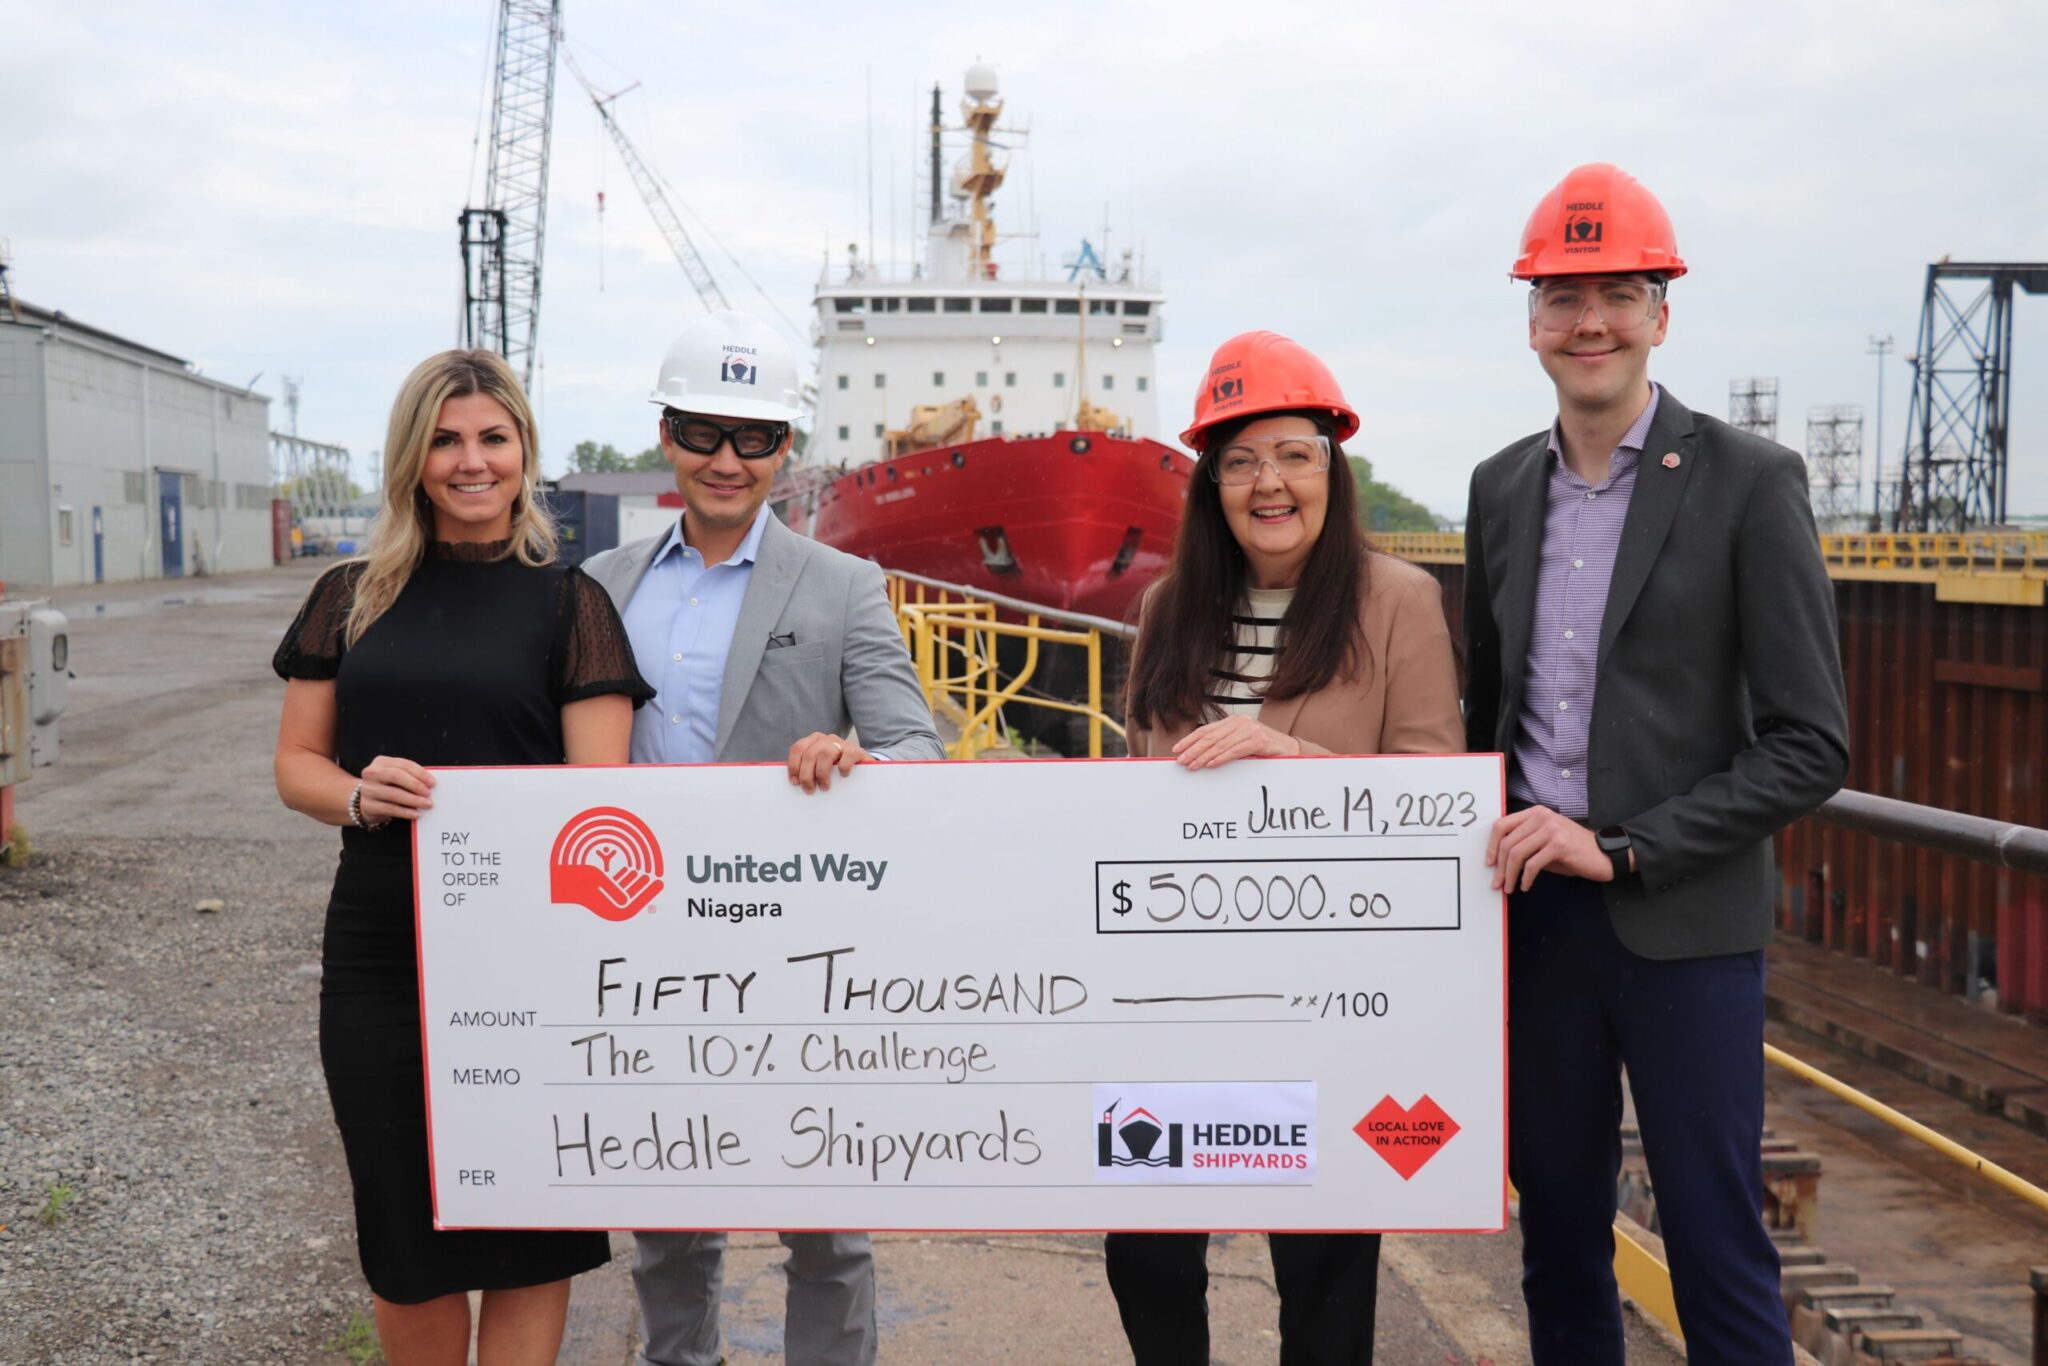 Dawn Thorp, Heddle Shipyards Public Relations & Communications Manager (L) and Shaun Padulo, Heddle Shipyards President & CEO present a $50,000 cheque to United Way's Frances Hallworth, CEO and Kevin Jong, Director of Development and Communications in support of the The Heddle Shipyards 10% Challenge.